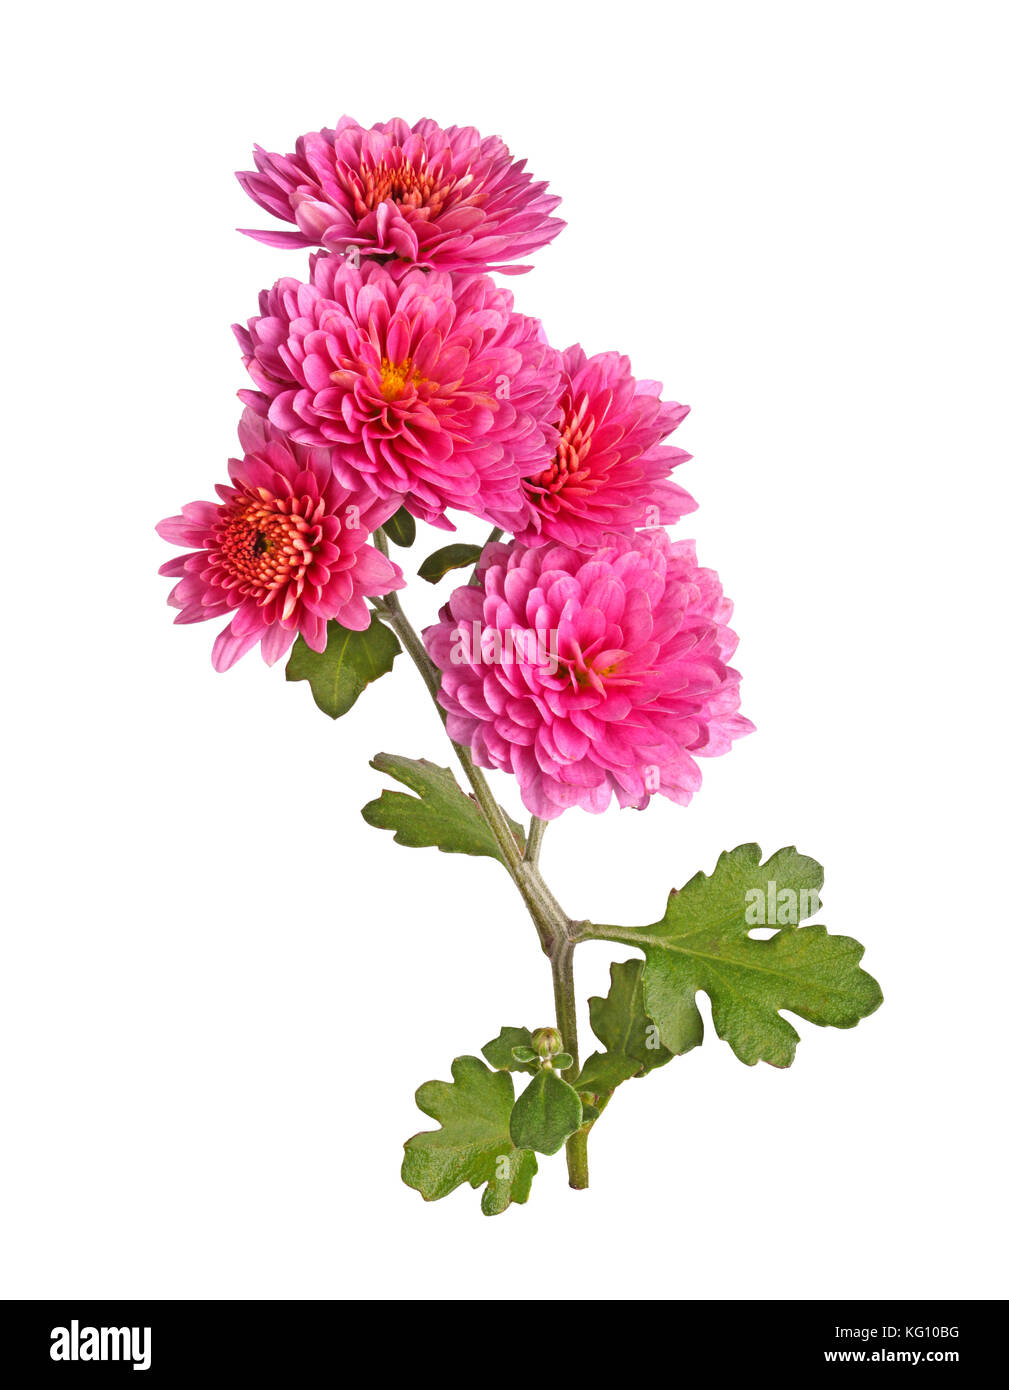 Single stem with many pink flowers of the fall chrysanthemum (Chrysanthemum indicum) isolated against a white background Stock Photo